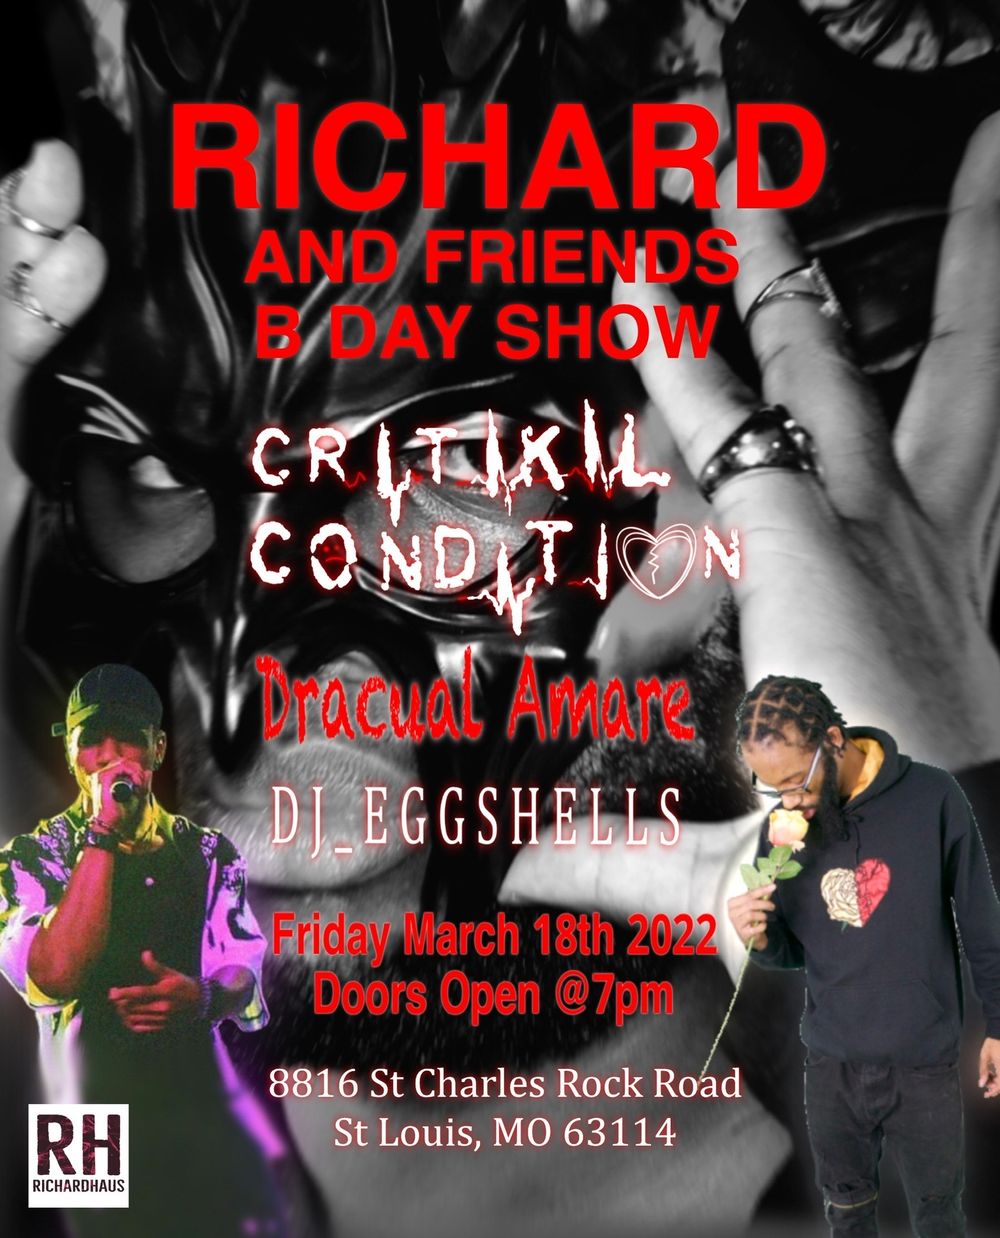 RICHARD & FRIENDS HOST A SHOW ON 3/18 TICKETS ON SALE NOW!